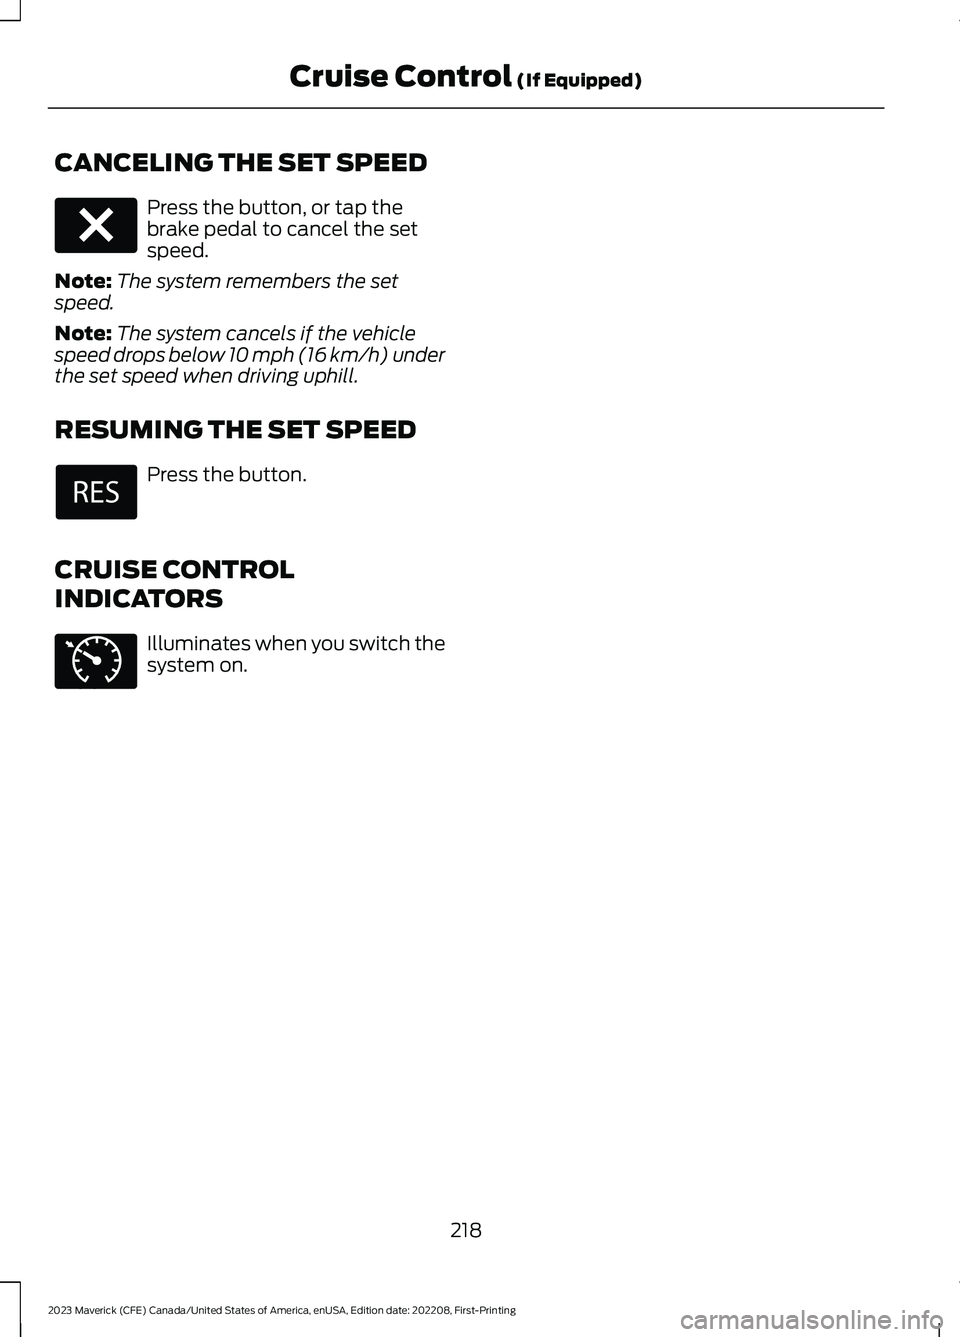 FORD MAVERICK 2023  Owners Manual CANCELING THE SET SPEED
Press the button, or tap thebrake pedal to cancel the setspeed.
Note:The system remembers the setspeed.
Note:The system cancels if the vehiclespeed drops below 10 mph (16 km/h)